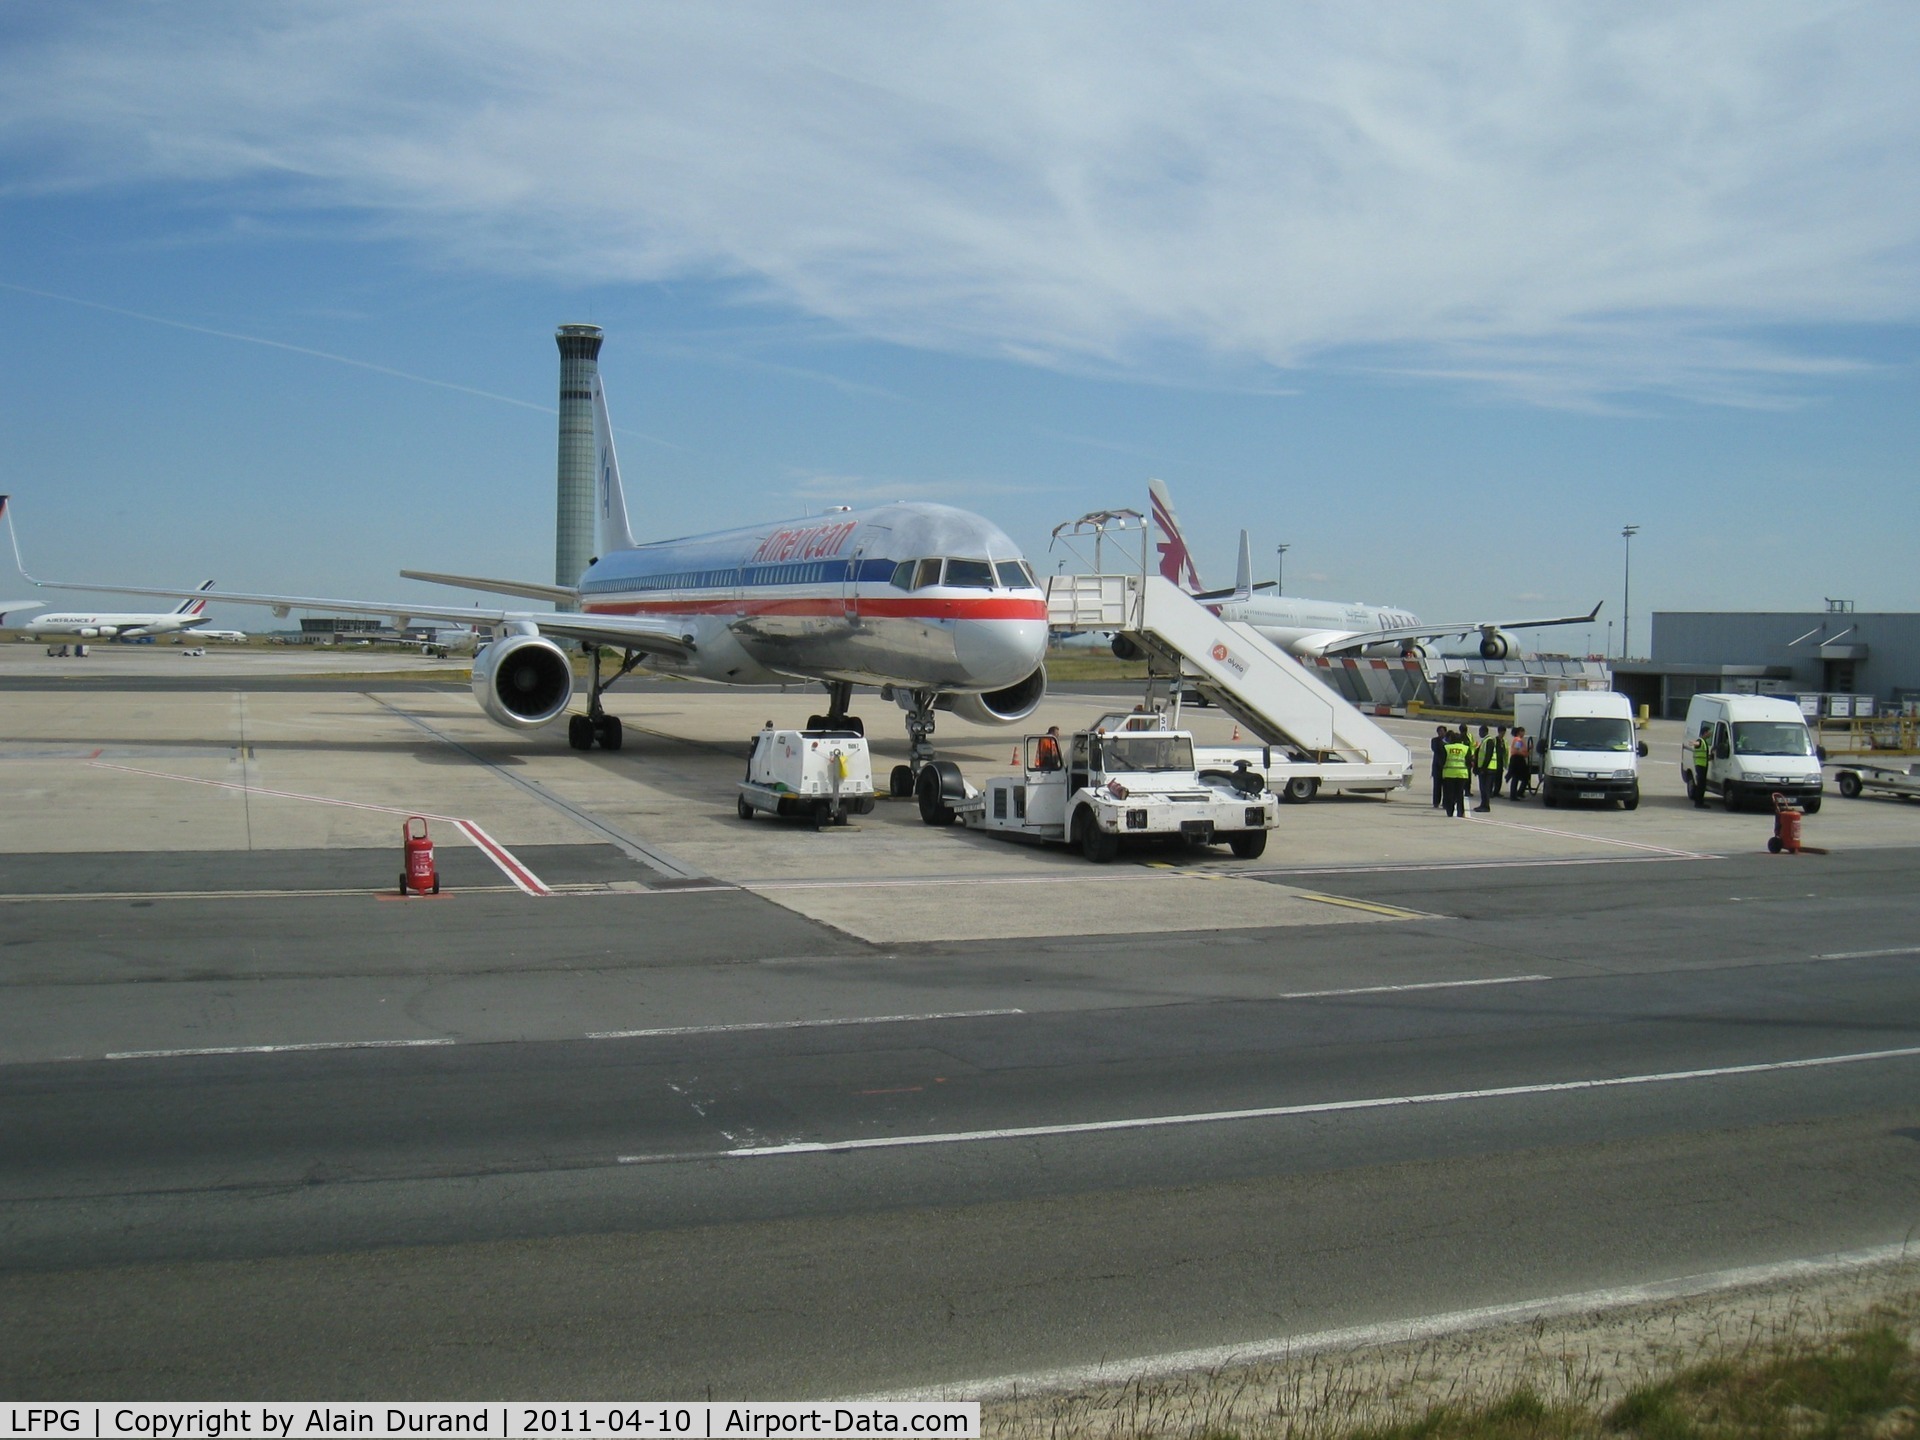 Paris Charles de Gaulle Airport (Roissy Airport), Paris France (LFPG) - AA normaly docks at opposite located Terminal 2A, but sometimes, lack of gates dictactes a temporary transfer on Sierra remote ramps at Terminal 1 